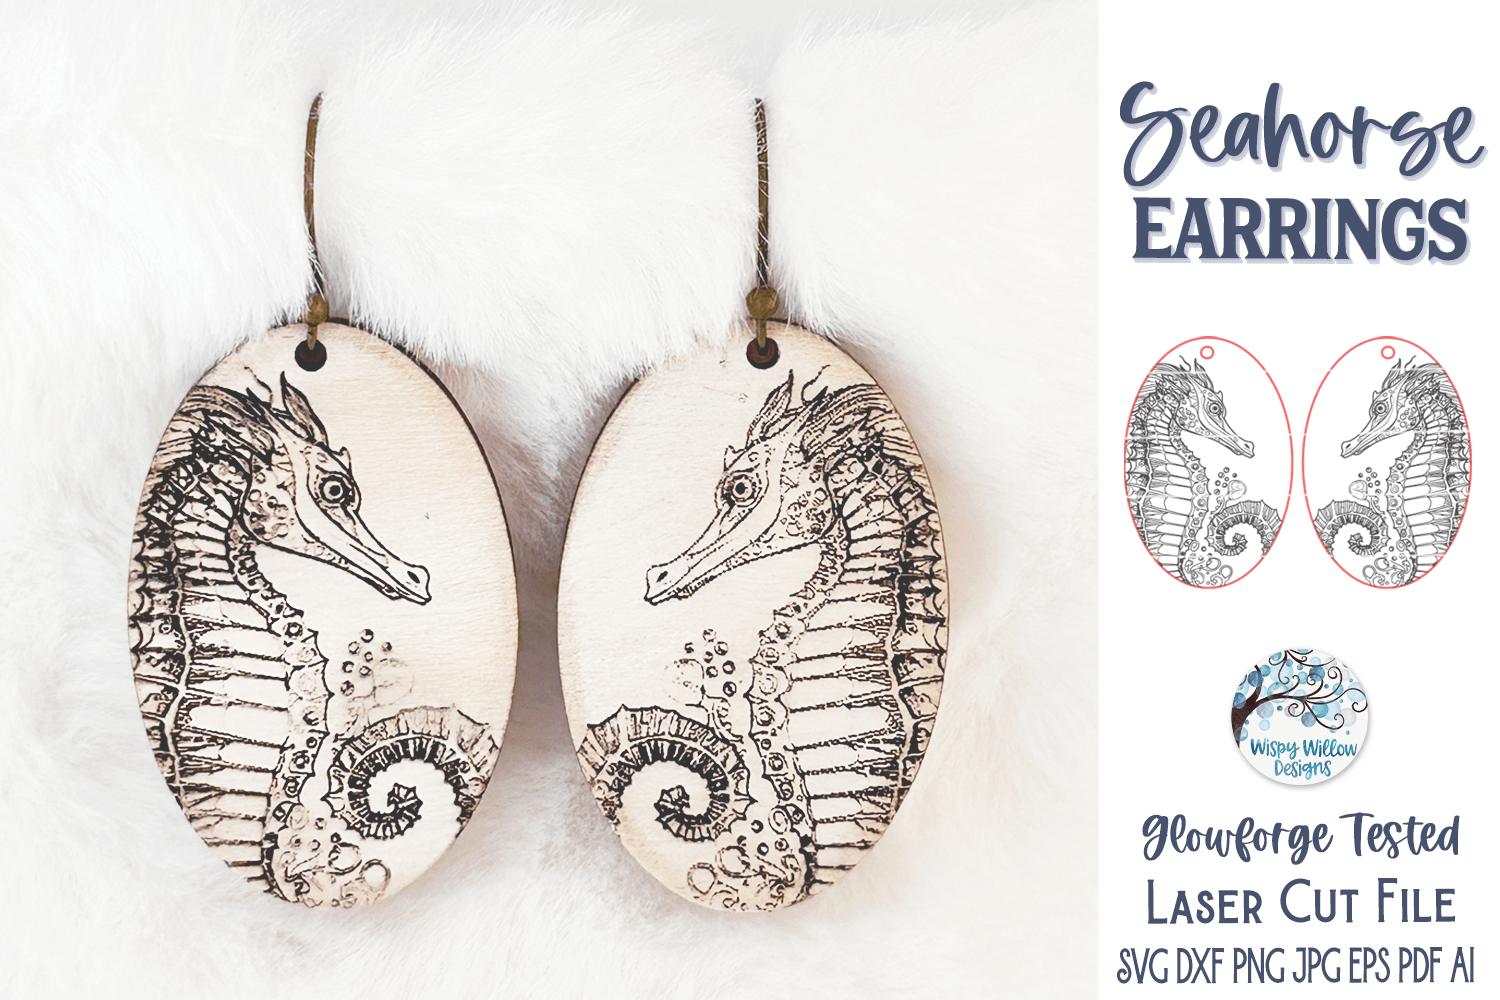 Seahorse Earring File for Glowforge or Laser Cutter Wispy Willow Designs Company